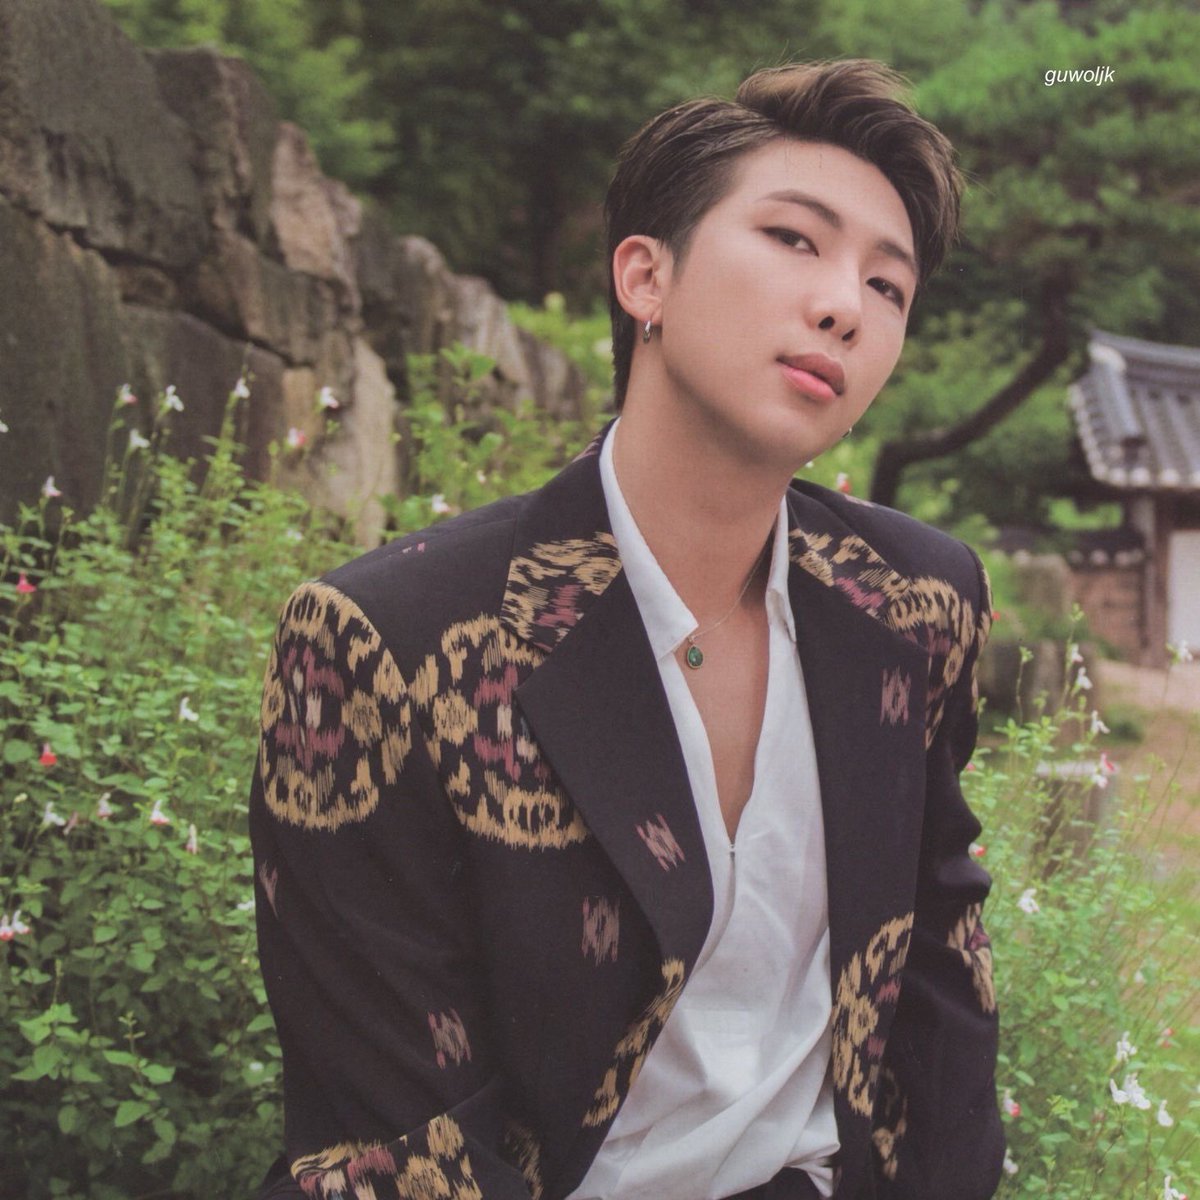 Next, it's the turn of Kim Namjoon! 1RT = 1 voteI vote for  #Dynamite under  #TheBestMusicVideo category at 2020  #PCAs  @BTS_twt